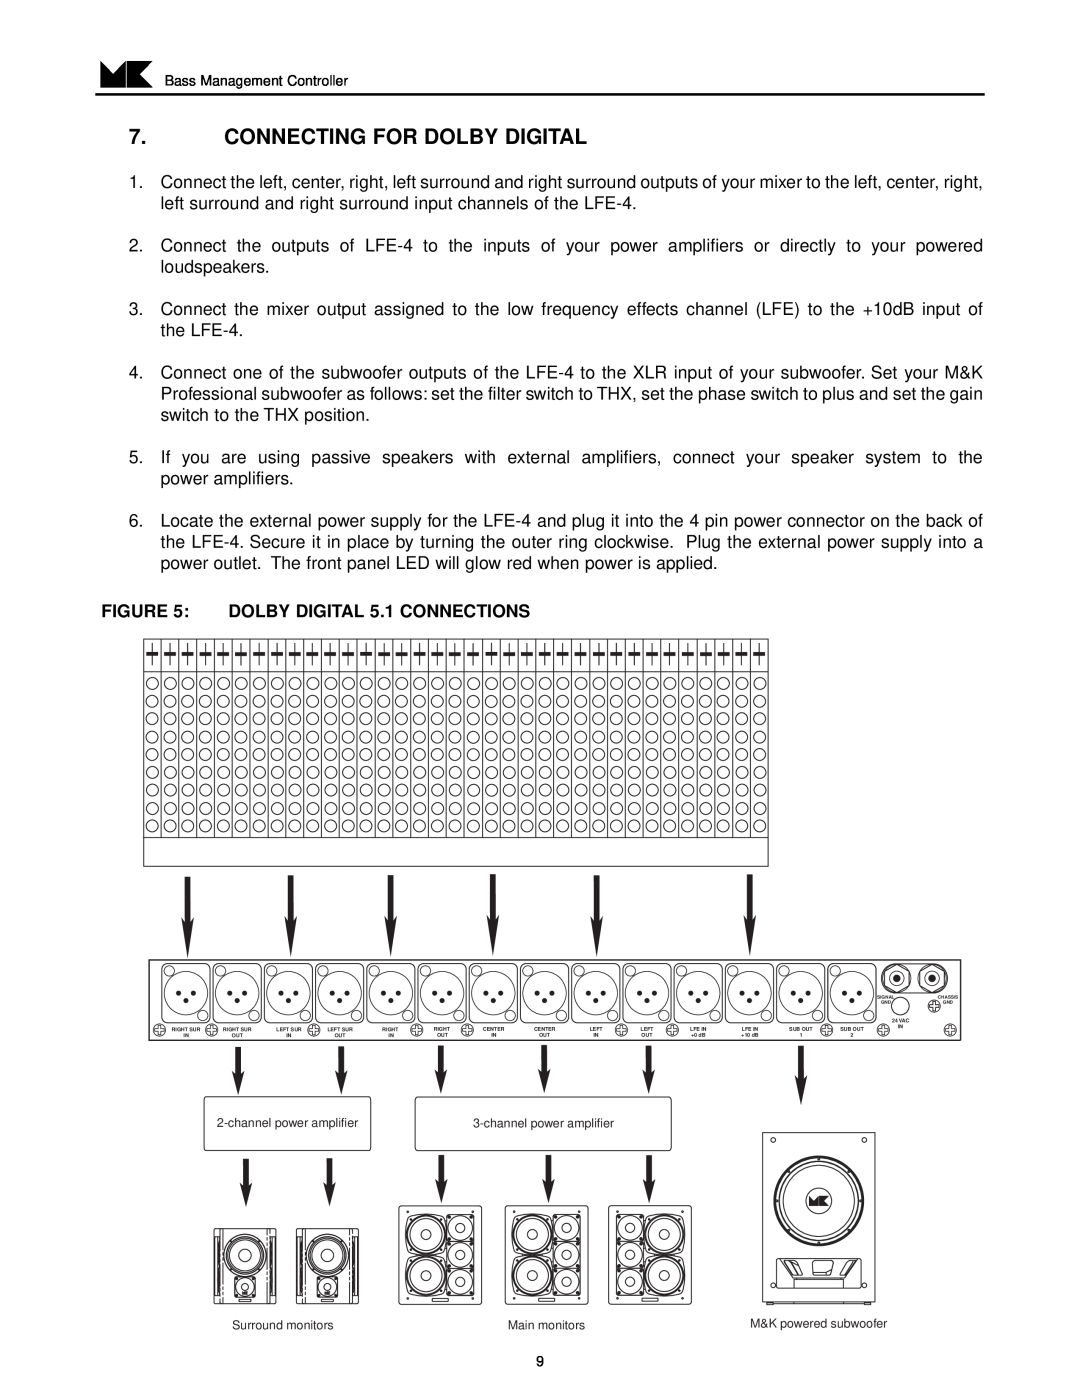 MK Sound LFE-4 operation manual Connecting For Dolby Digital, DOLBY DIGITAL 5.1 CONNECTIONS 